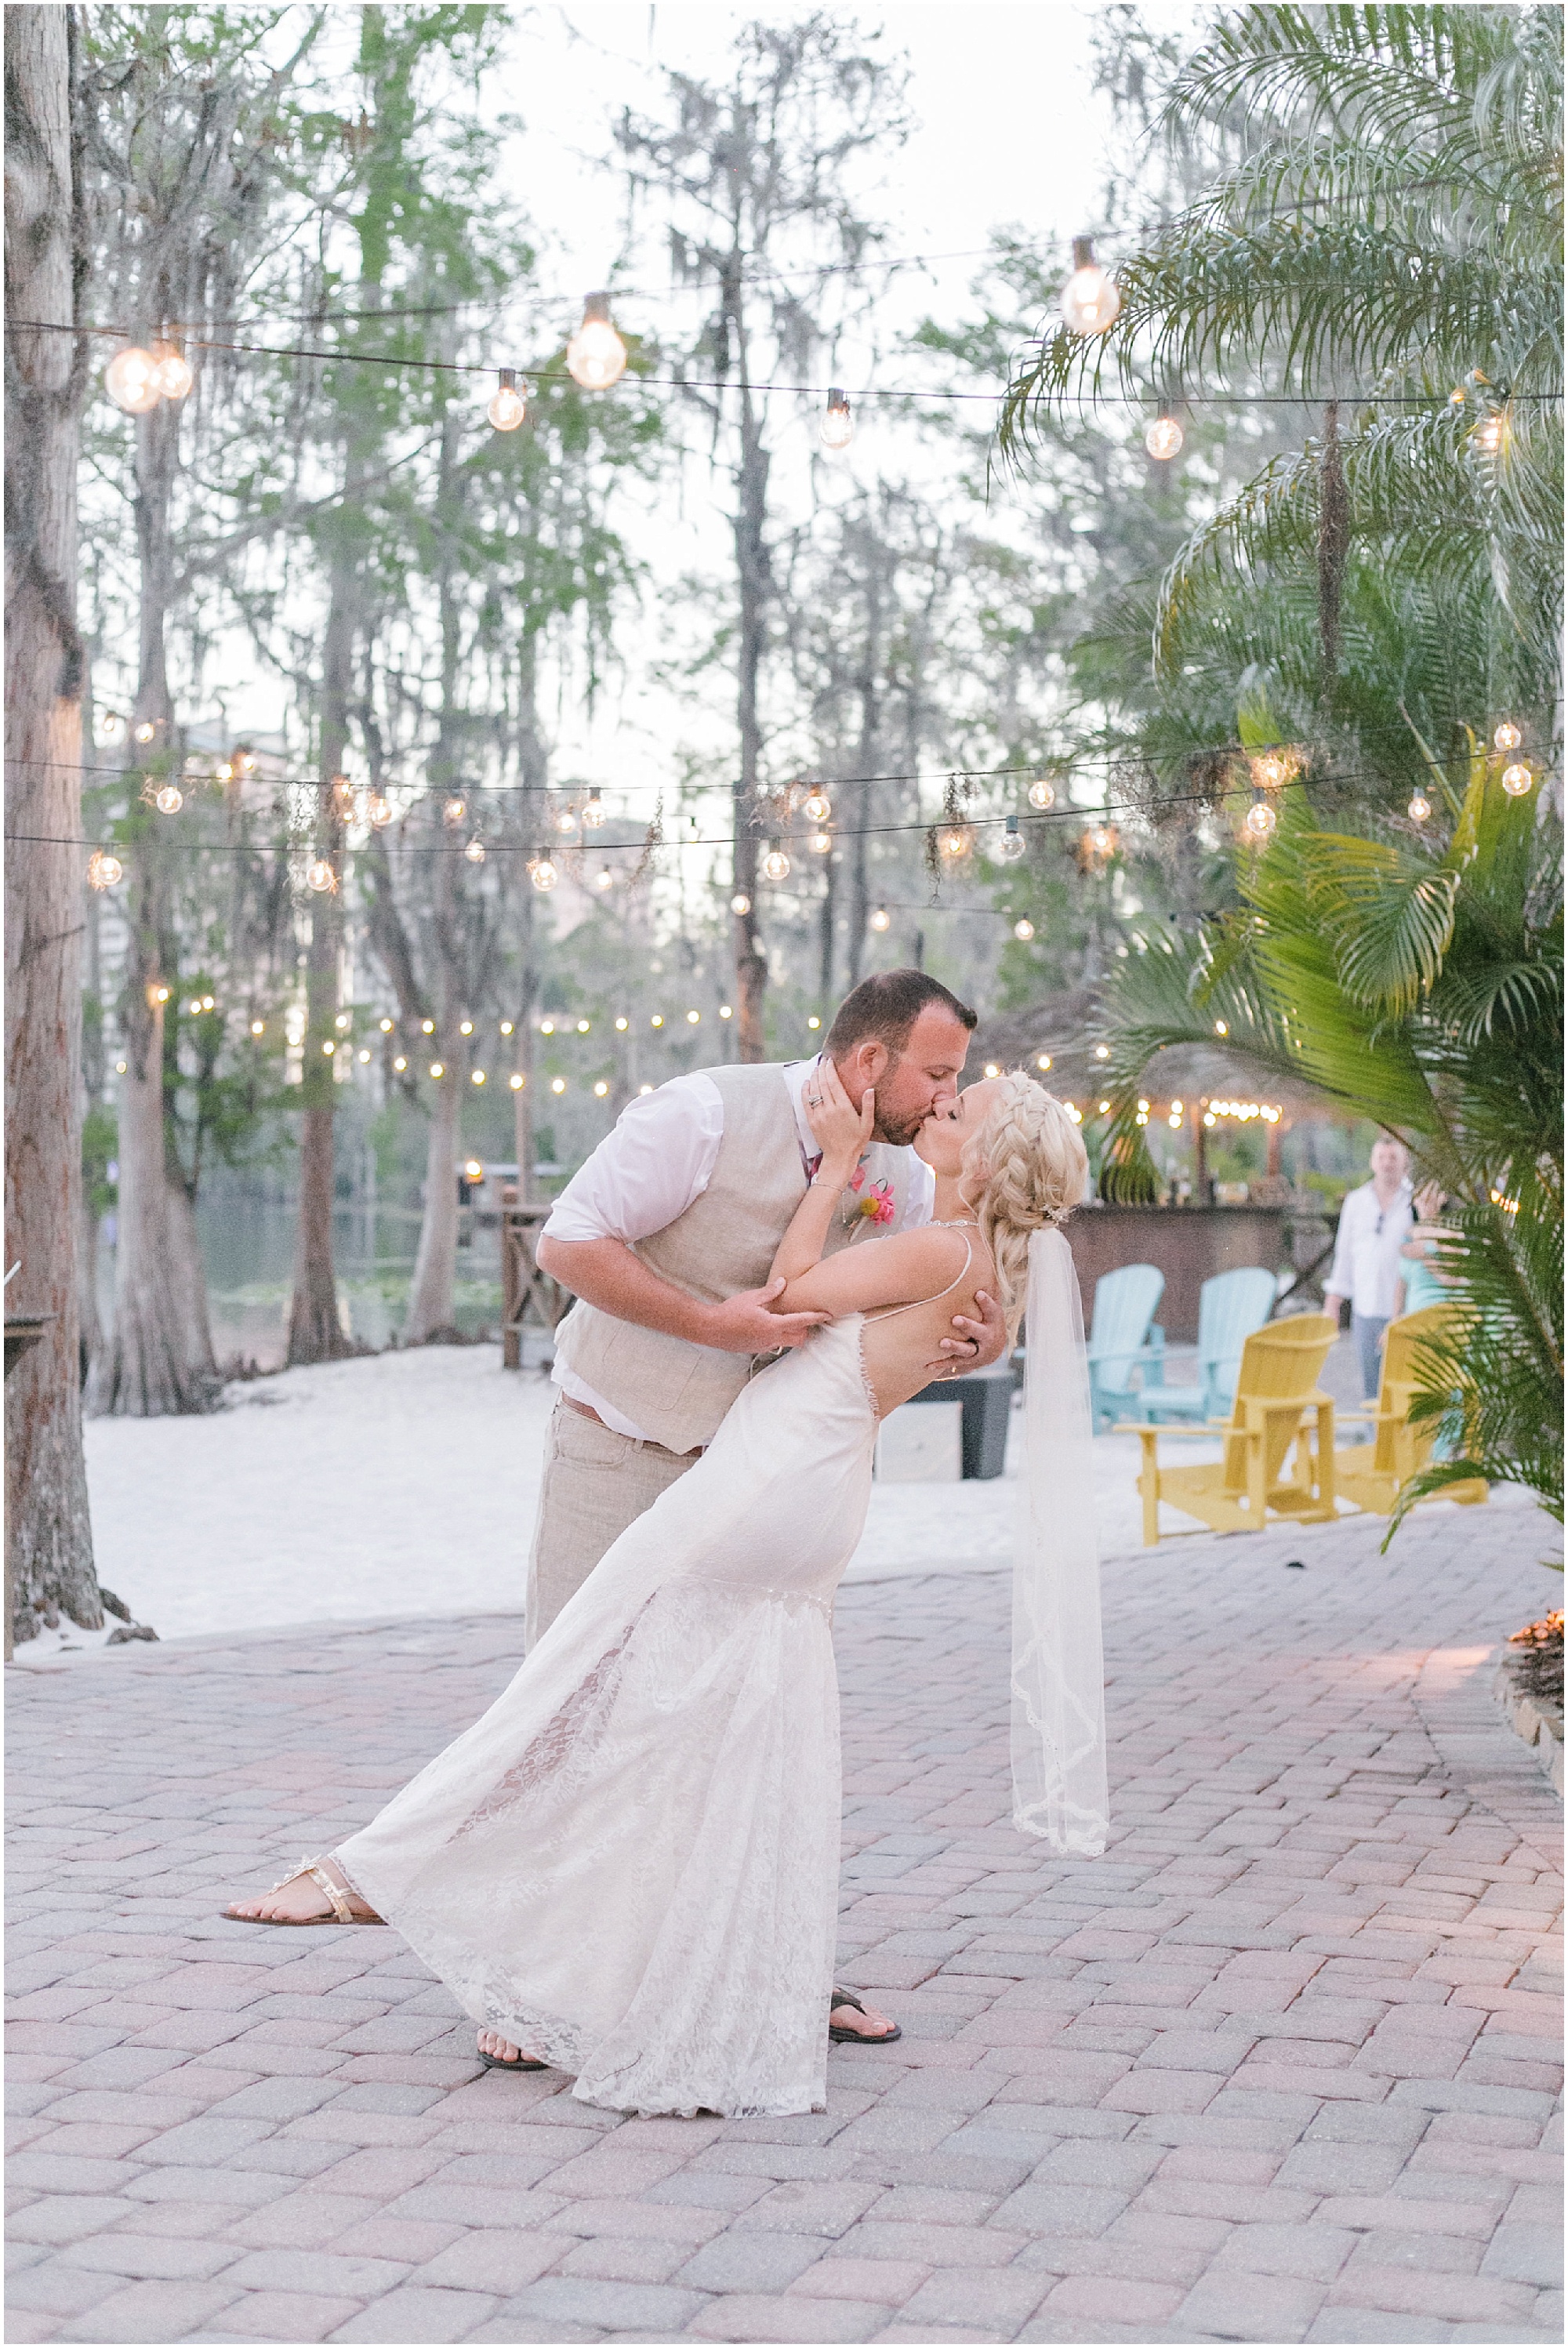 Husband dips his bride and gives her a kiss under patio lights.